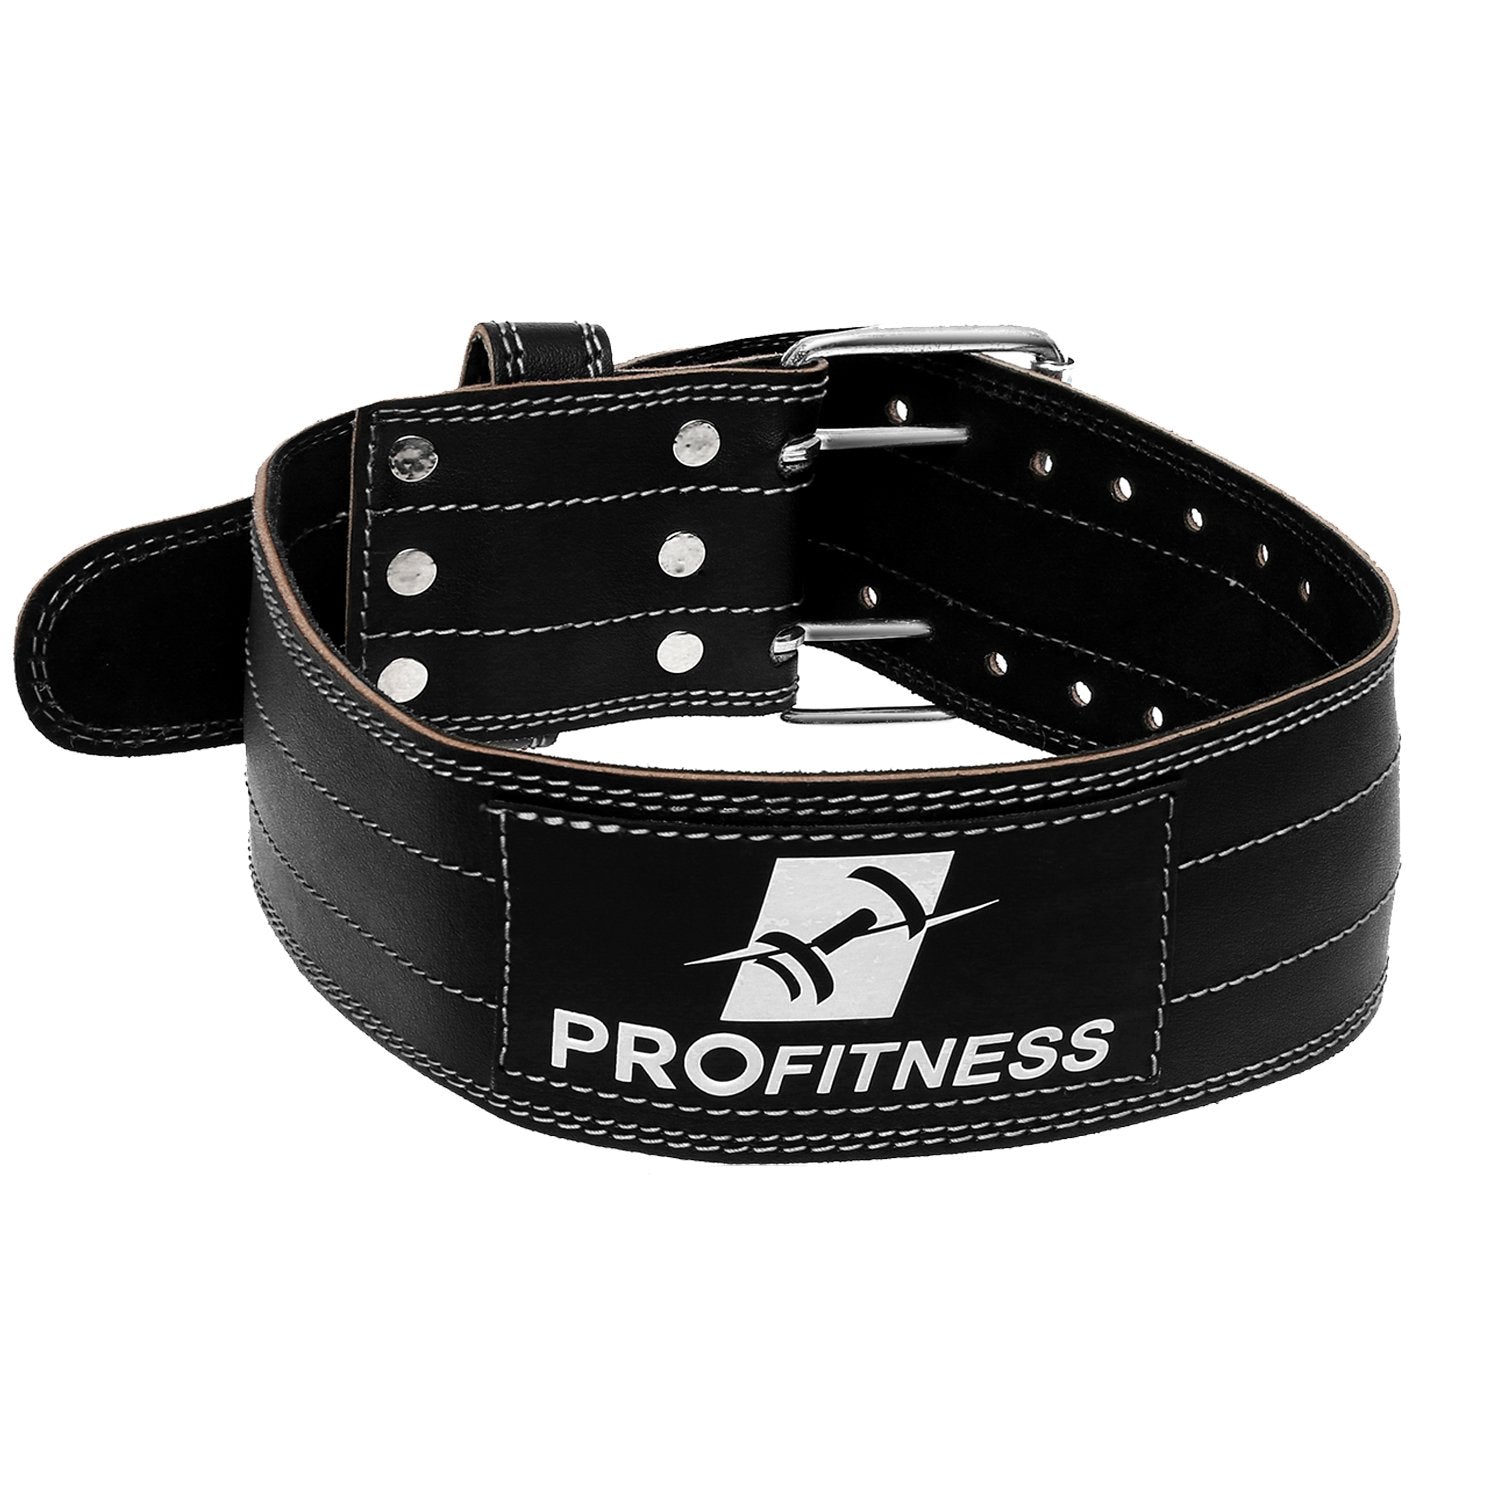 4-inch Wide Genuine Leather Workout Belt by TotalProFitness